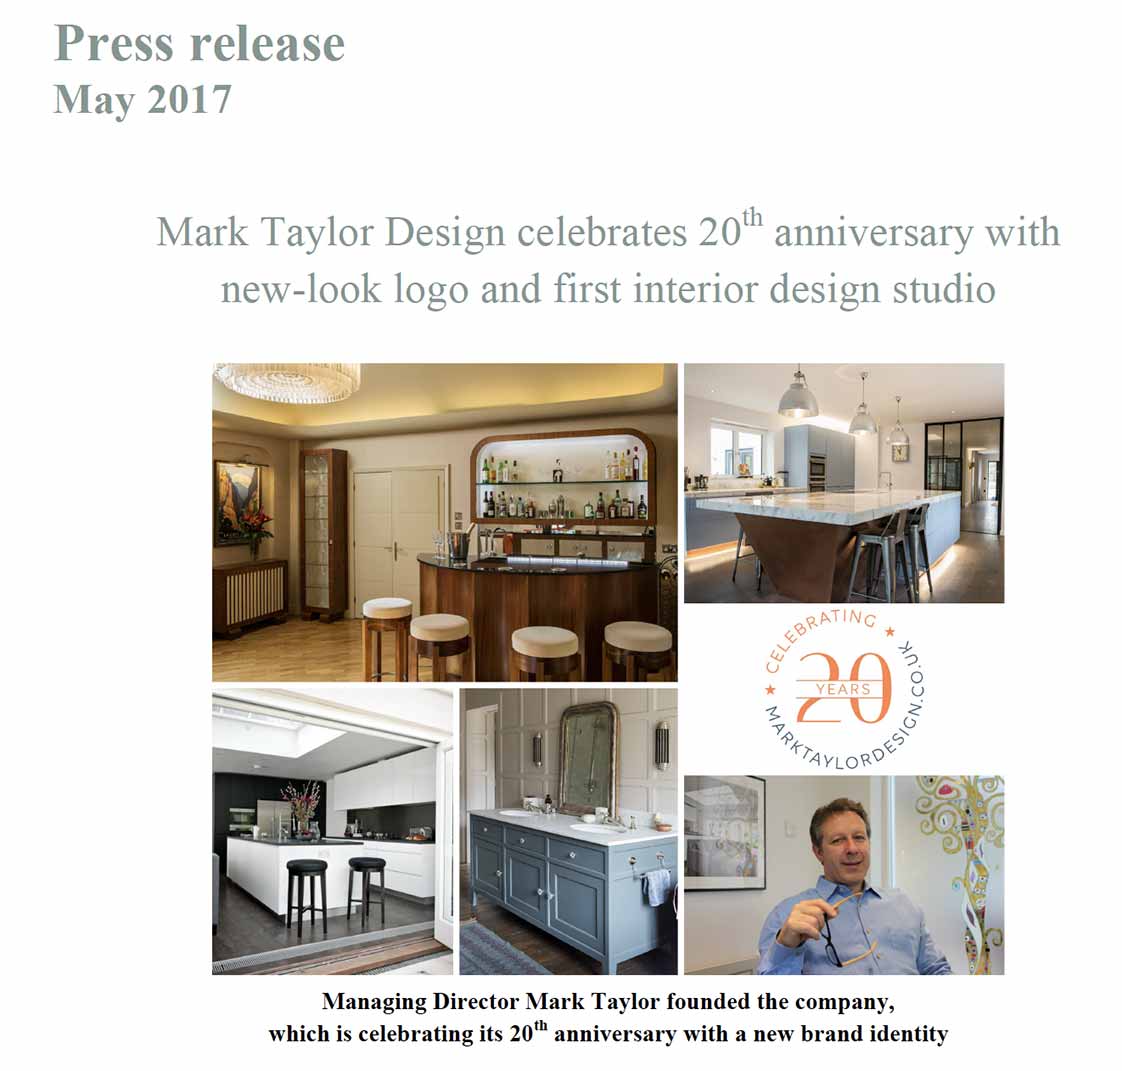 Mark Taylor Design celebrates 20th anniversary with new – look logo and first interior design studio